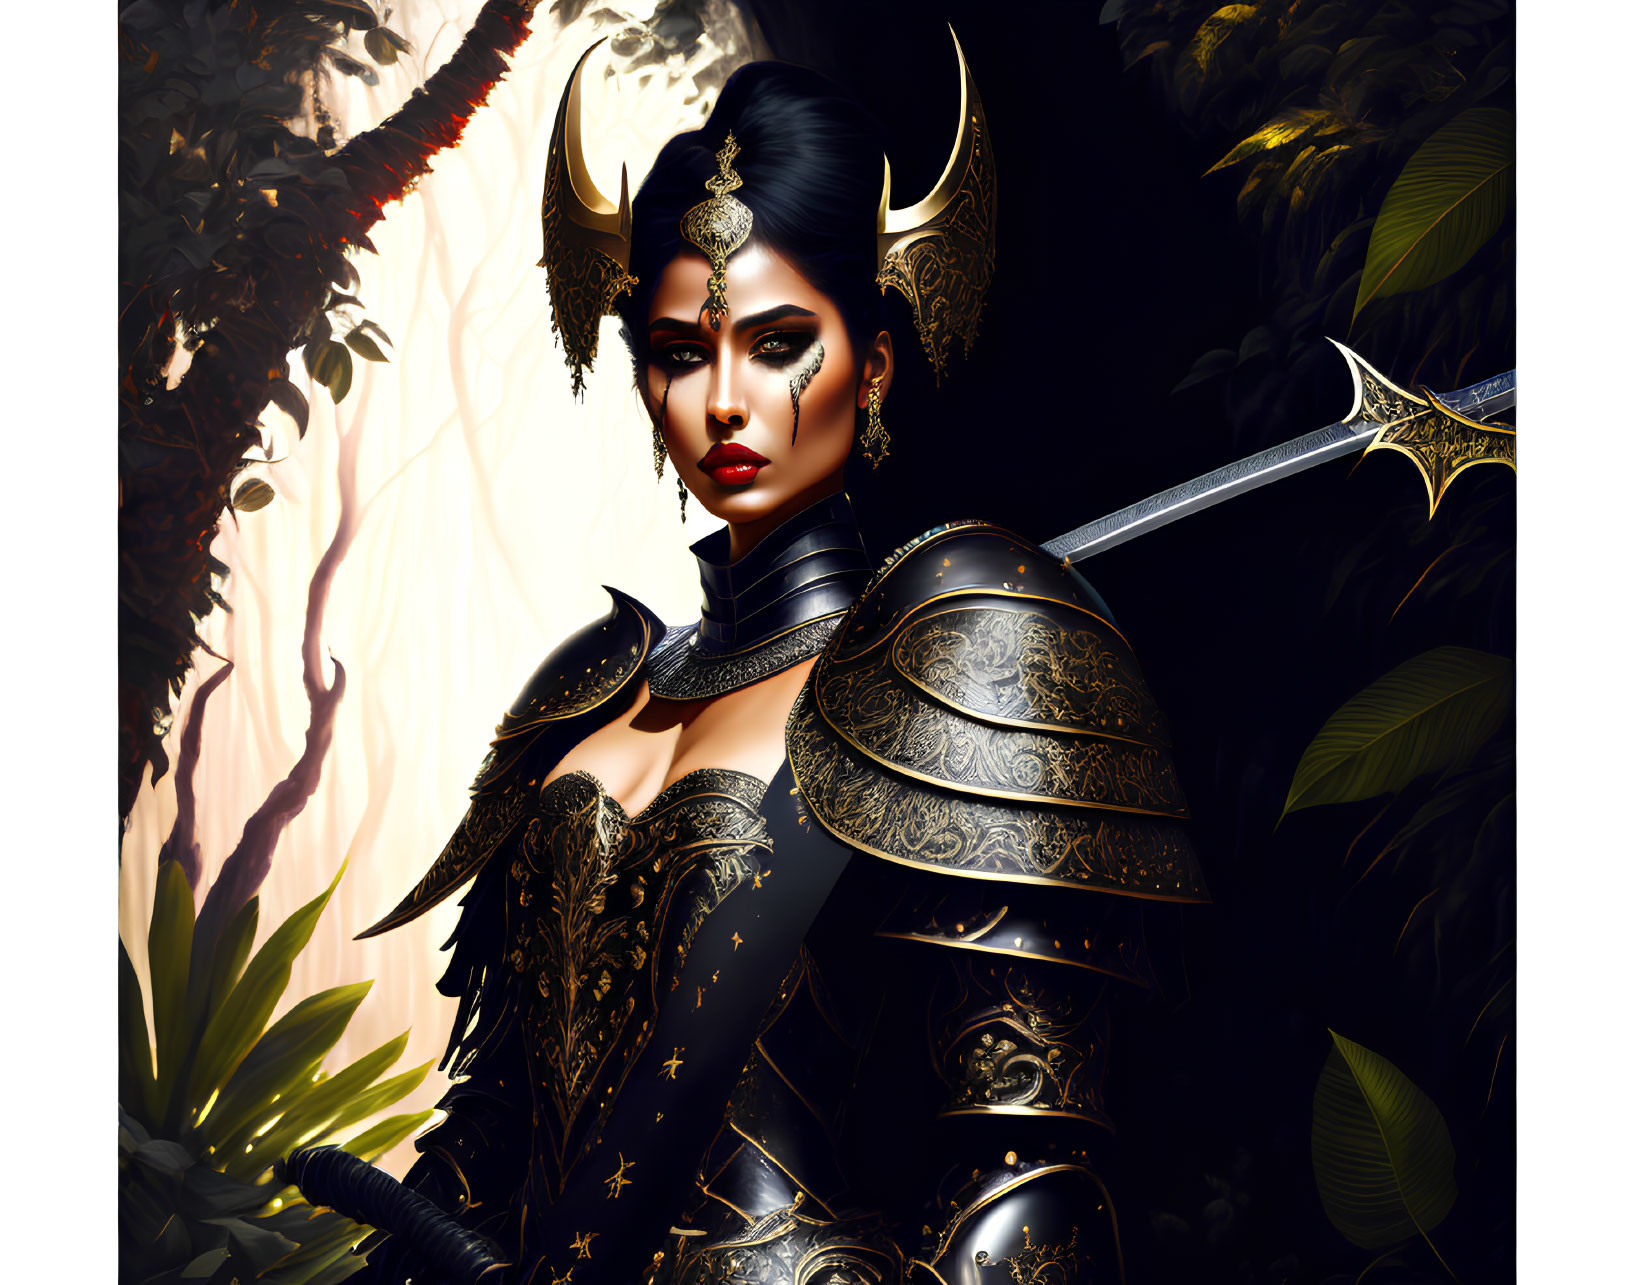 Detailed Illustration: Warrior Woman in Black and Gold Armor with Sword and Horned Helmet in Jungle Setting